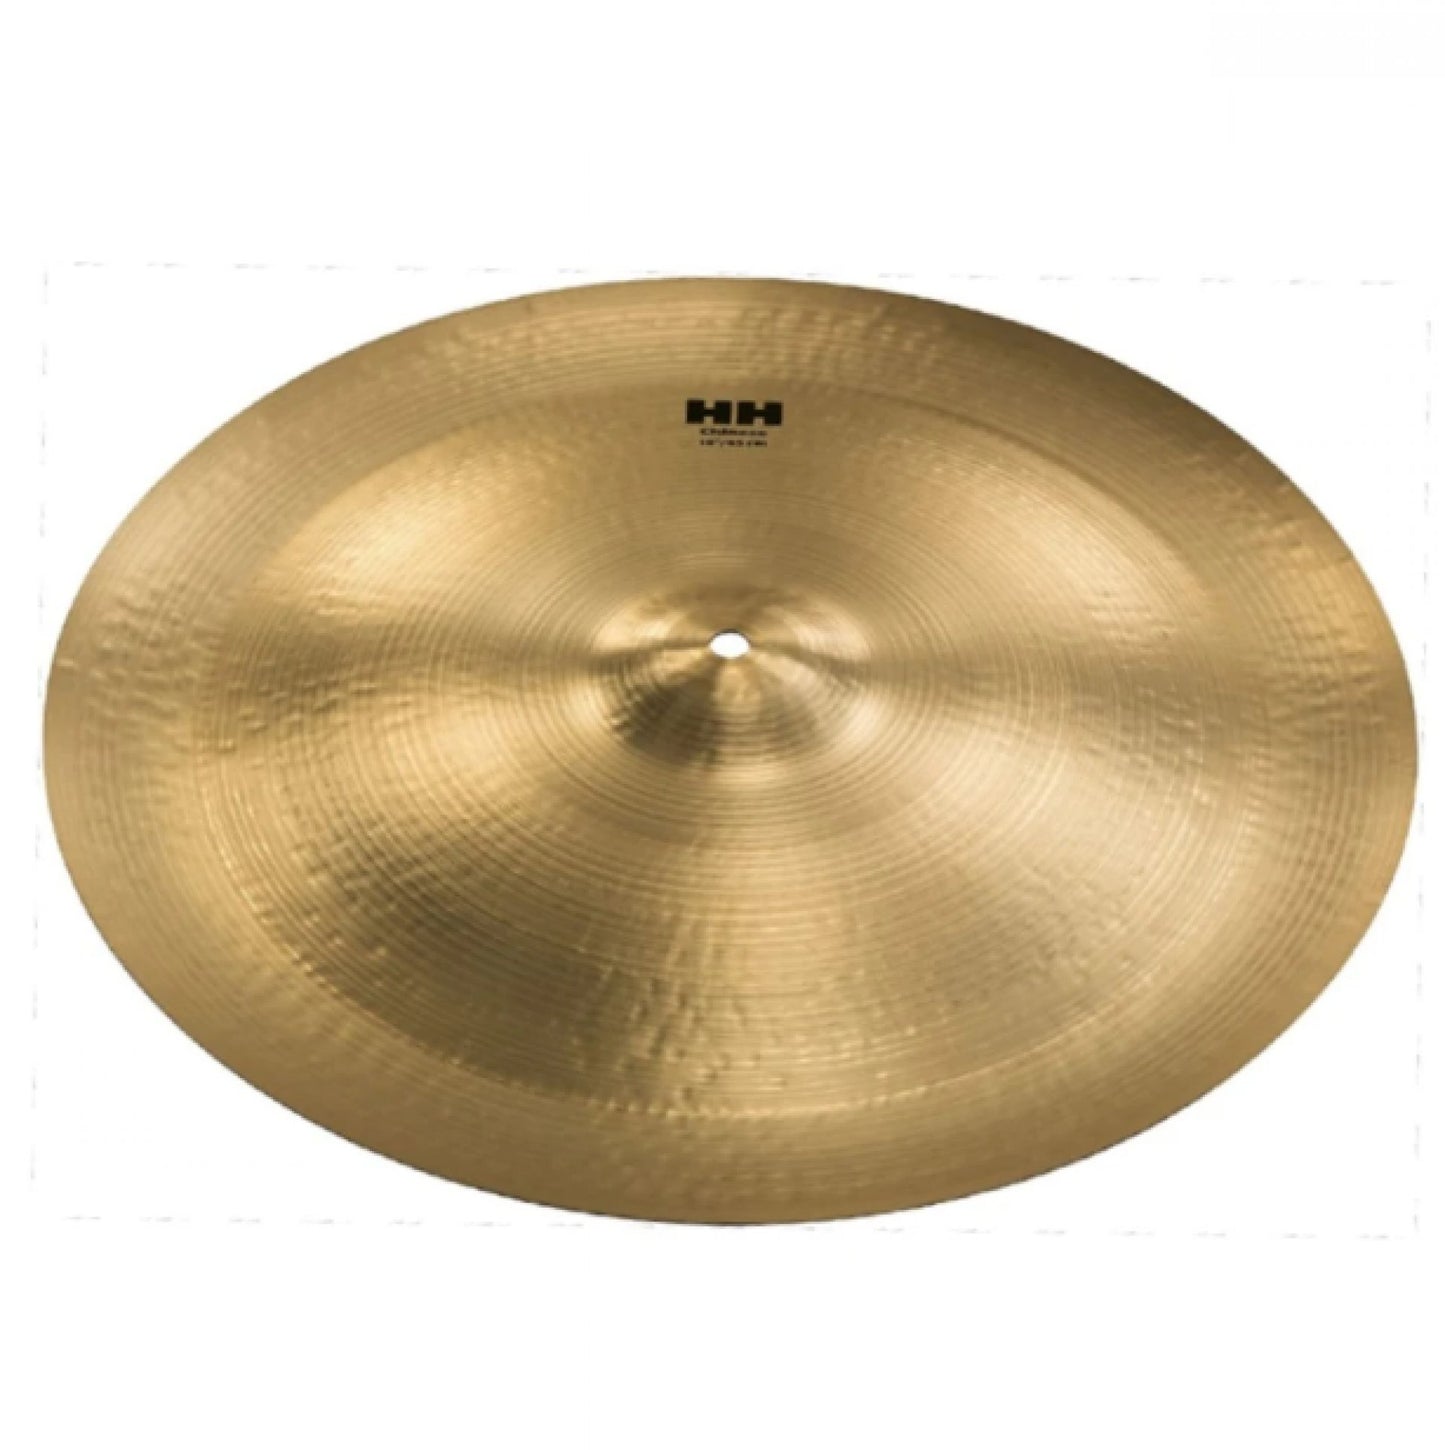 Sabian 11816 18 Inch HH Chinese Cymbals